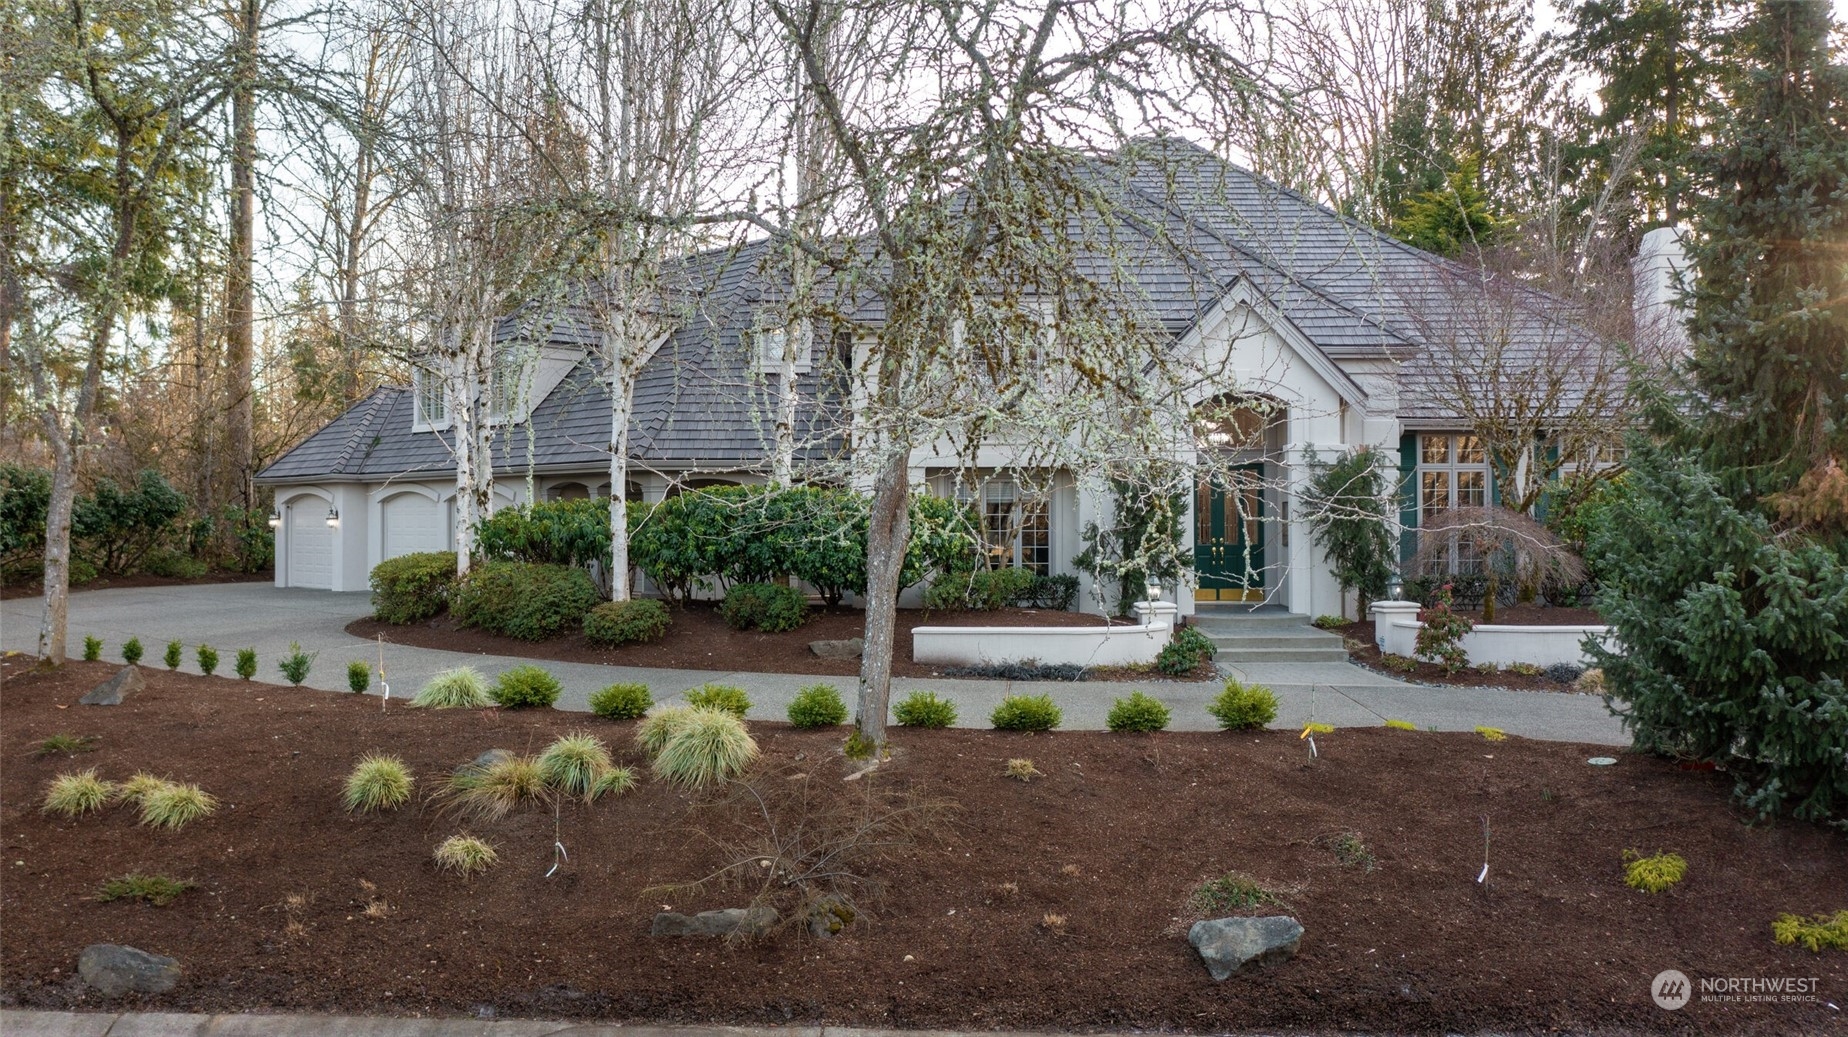 a view of a white house with a yard plants and large tree